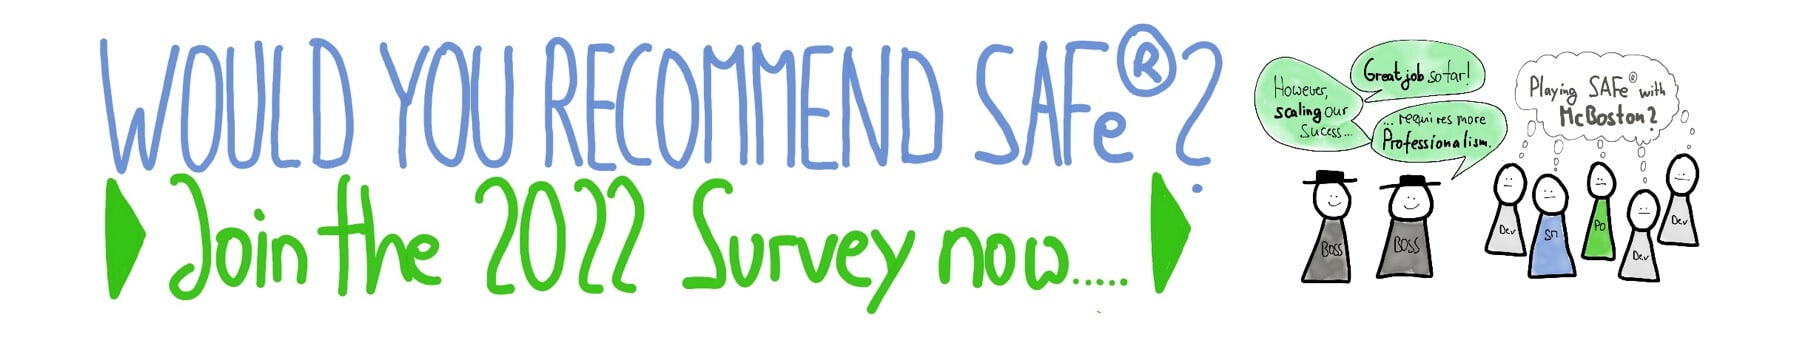 Survey 2022: Would you recommend SAFe®? Berlin Product People GmbH